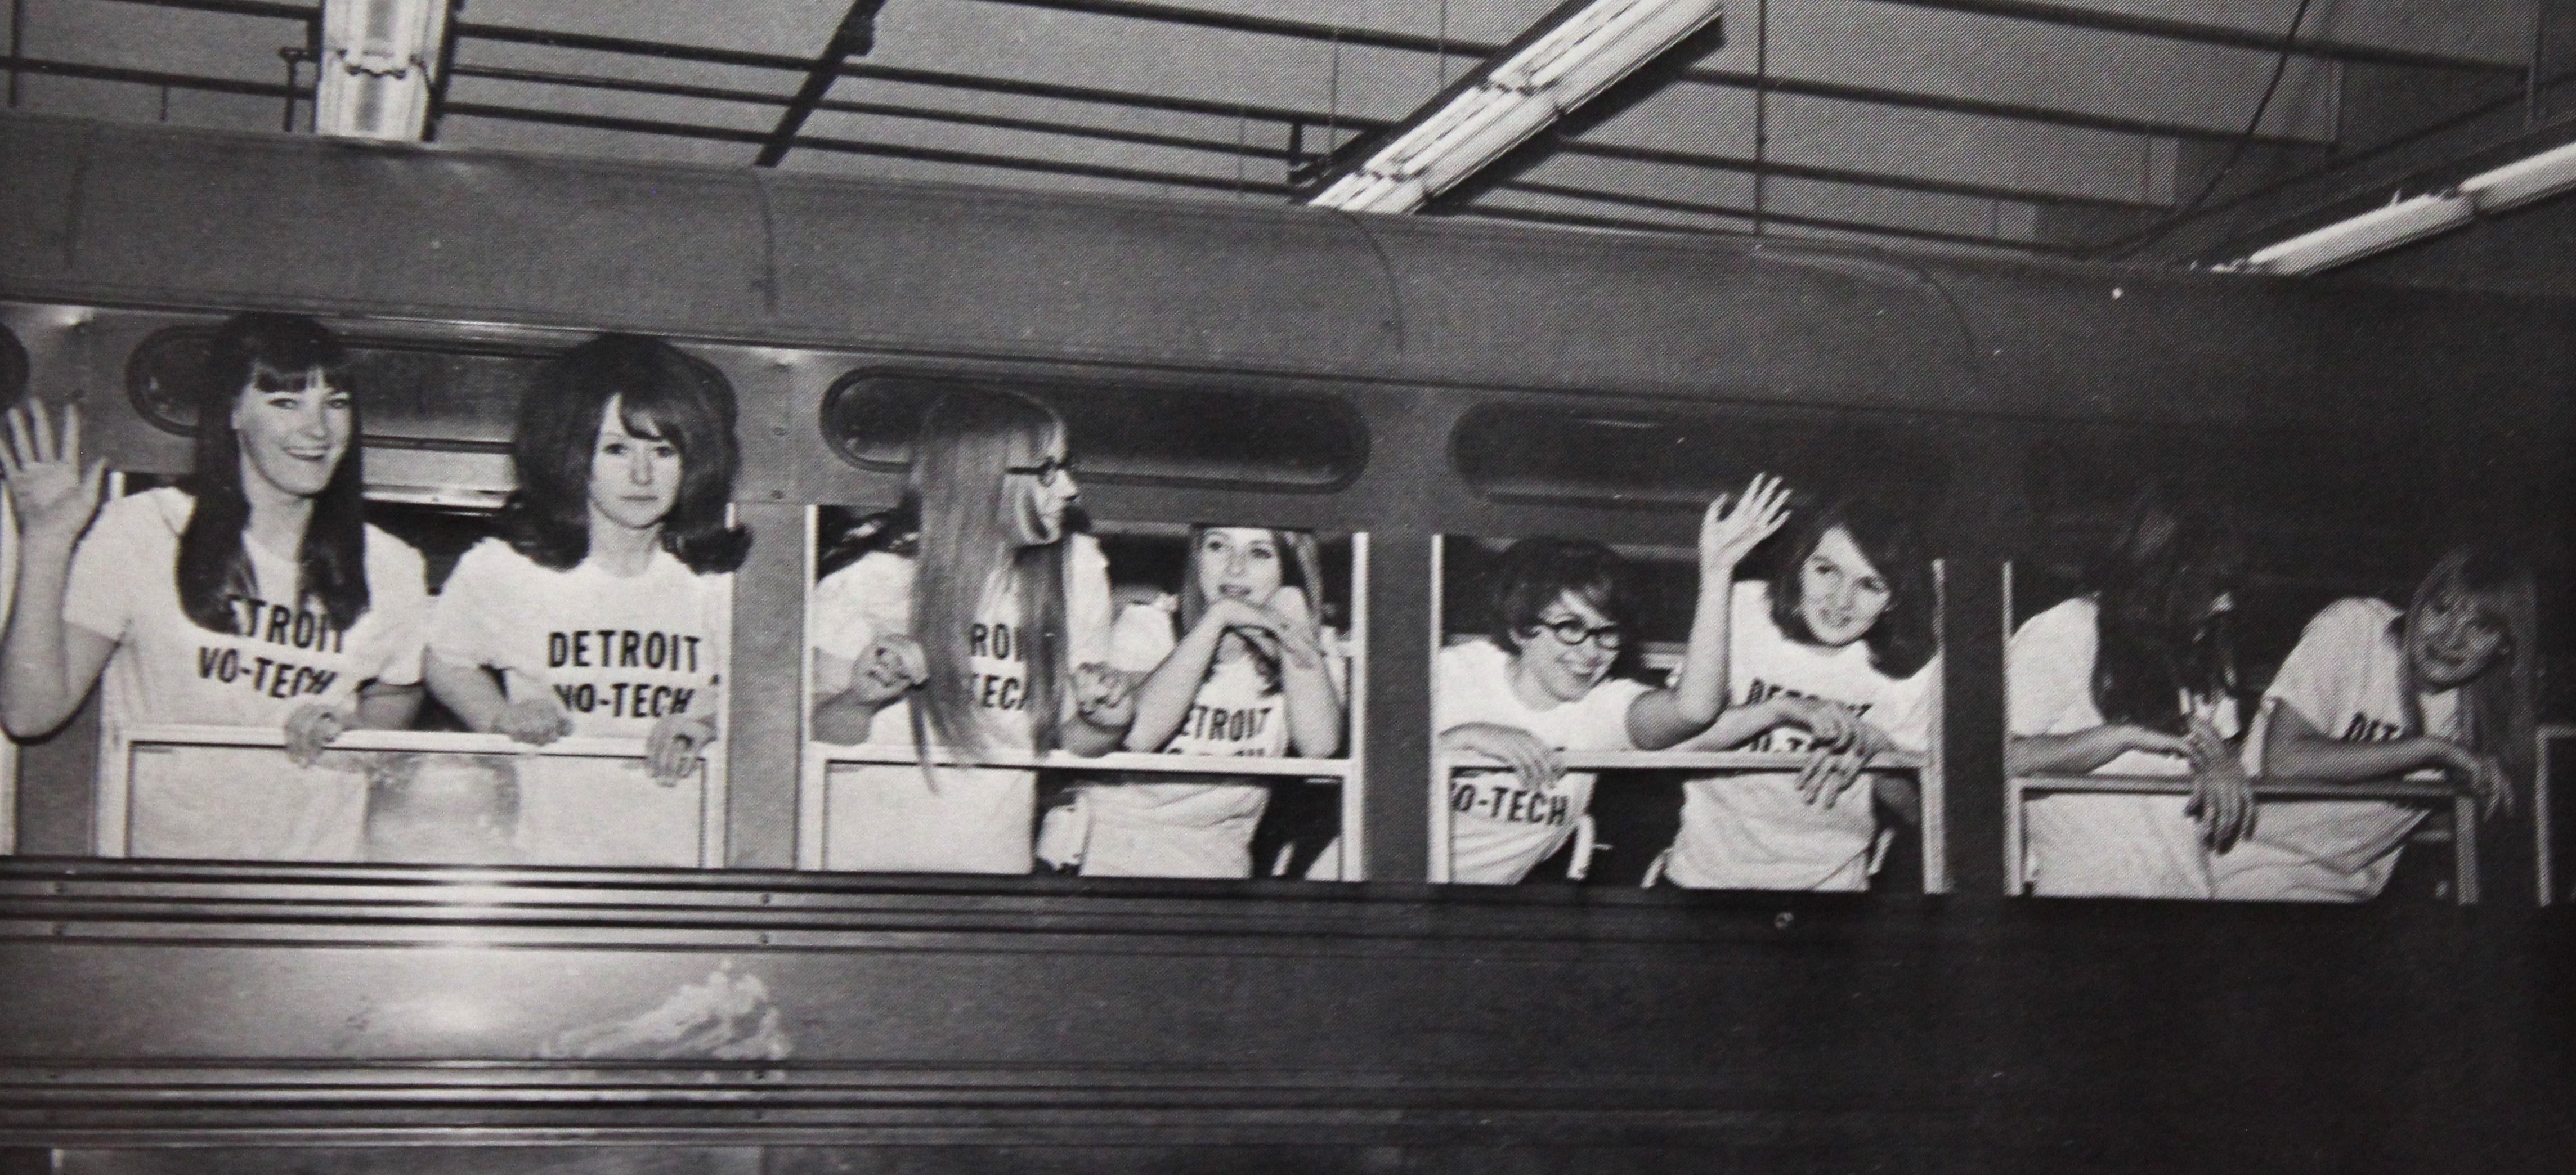 The Detroit Lakes campus Pep Club, on a bus in 1970